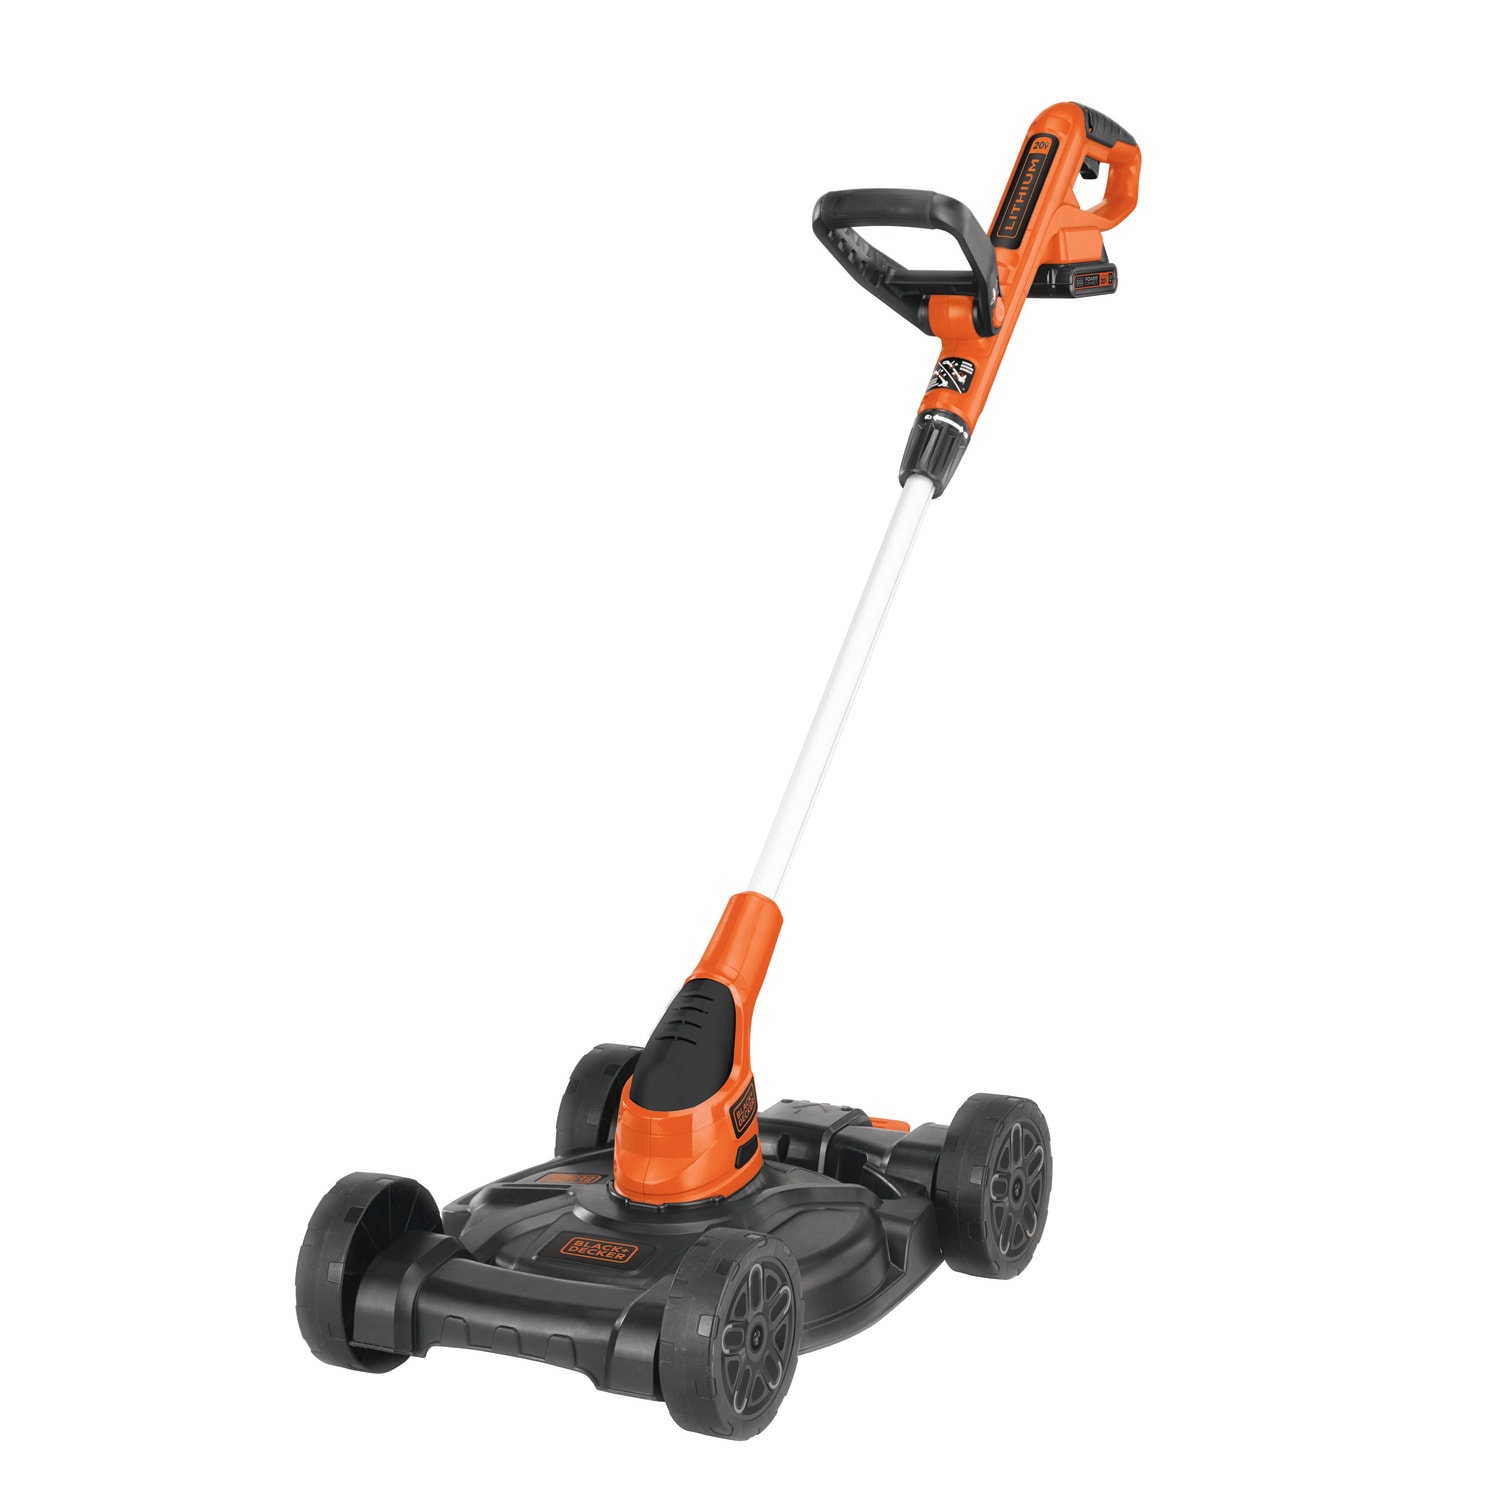 BLACK+DECKER Lawn Mower Removable Deck for String Trimmer - MTC220